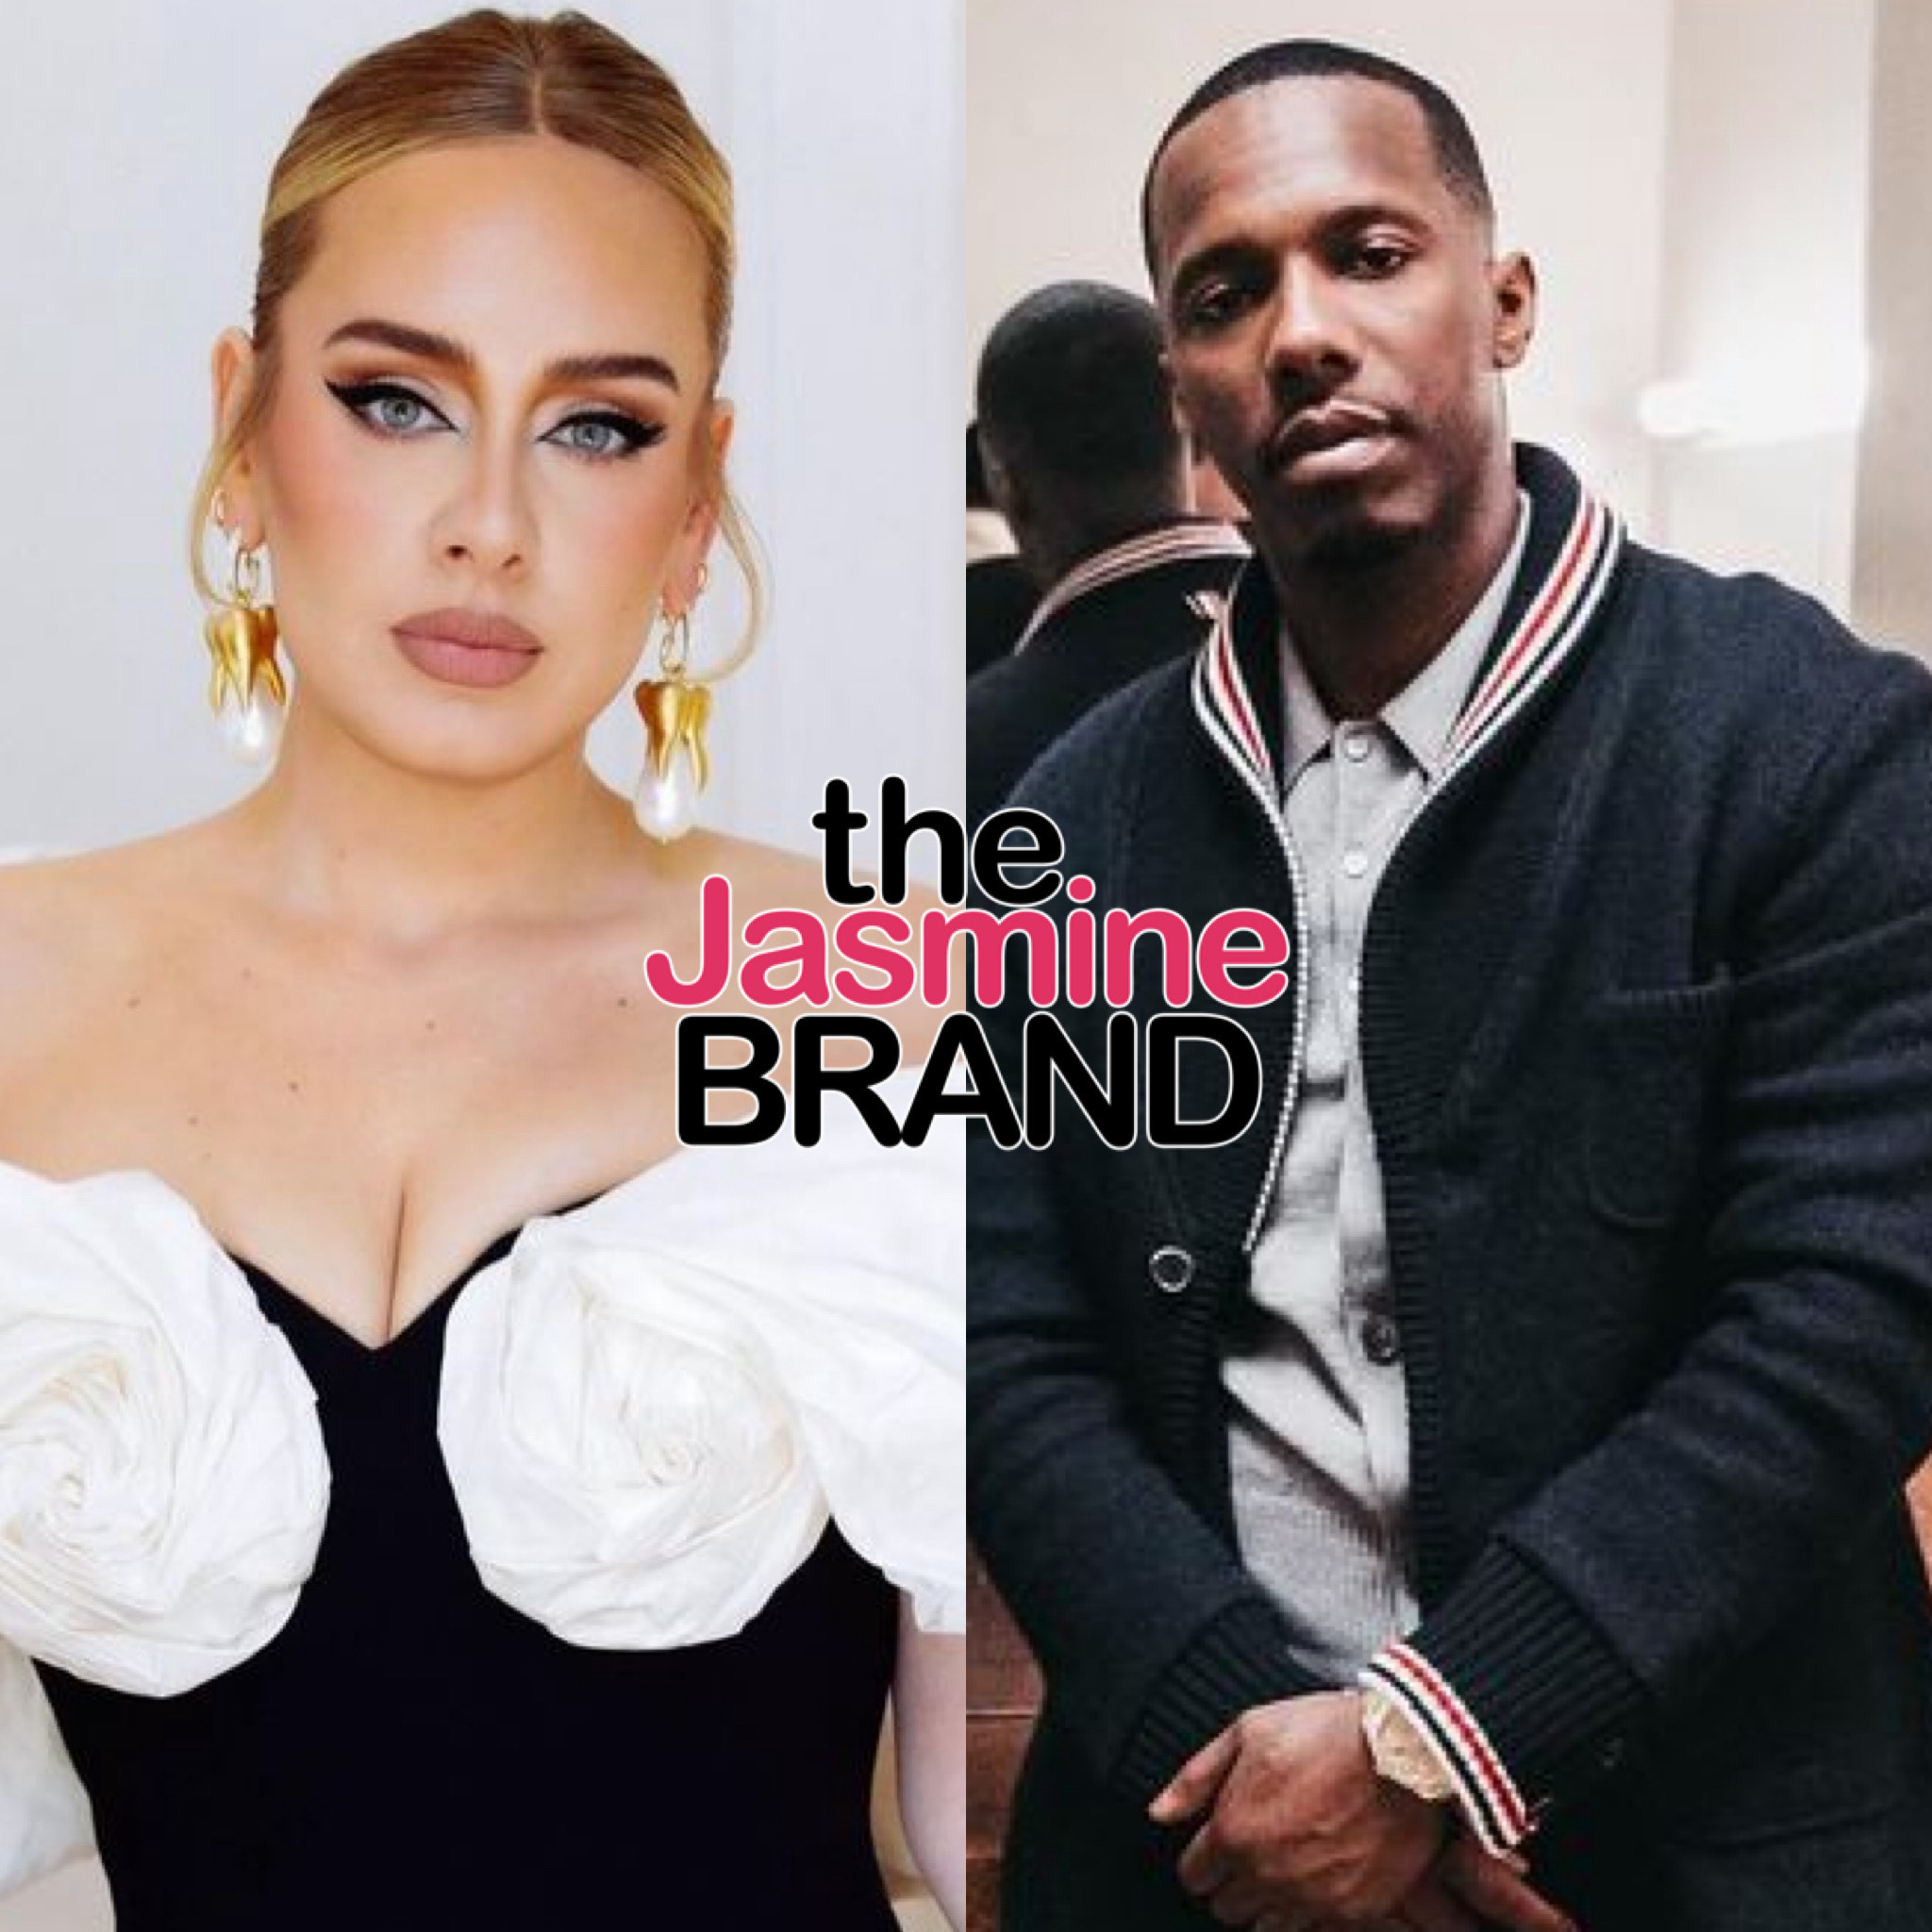 Adele Reportedly Paying Over 0 000 A Month For L A Mansion She S Sharing W Boyfriend Rich Paul Thejasminebrand